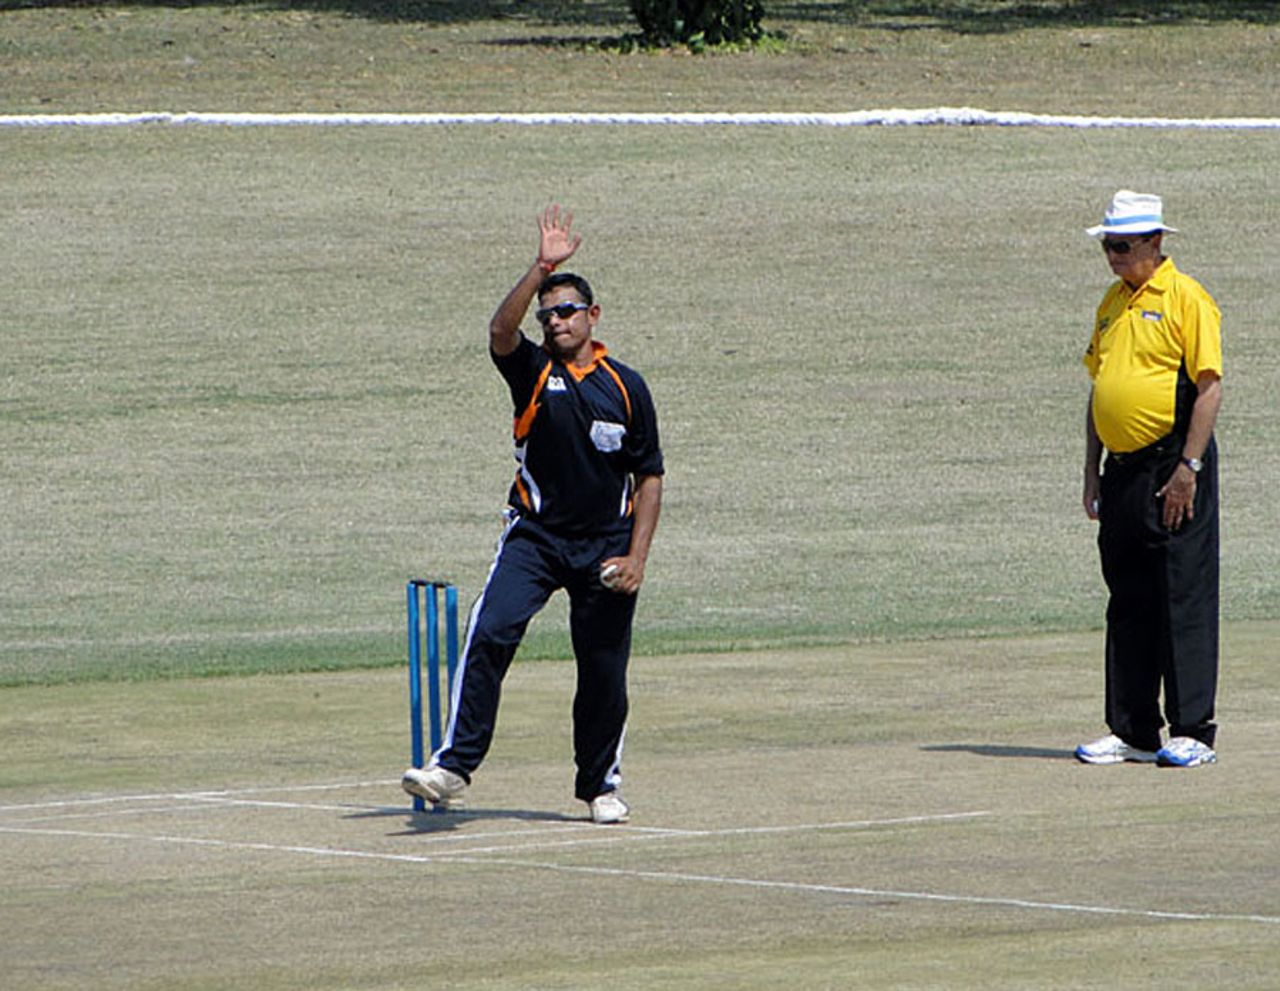 Hiren Varaiya picked up two wickets to help Rift Valley Rhinos to a win, Coast Pekee v Rift Valley Rhinos, East African Cup, Nairobi, August 28, 2011